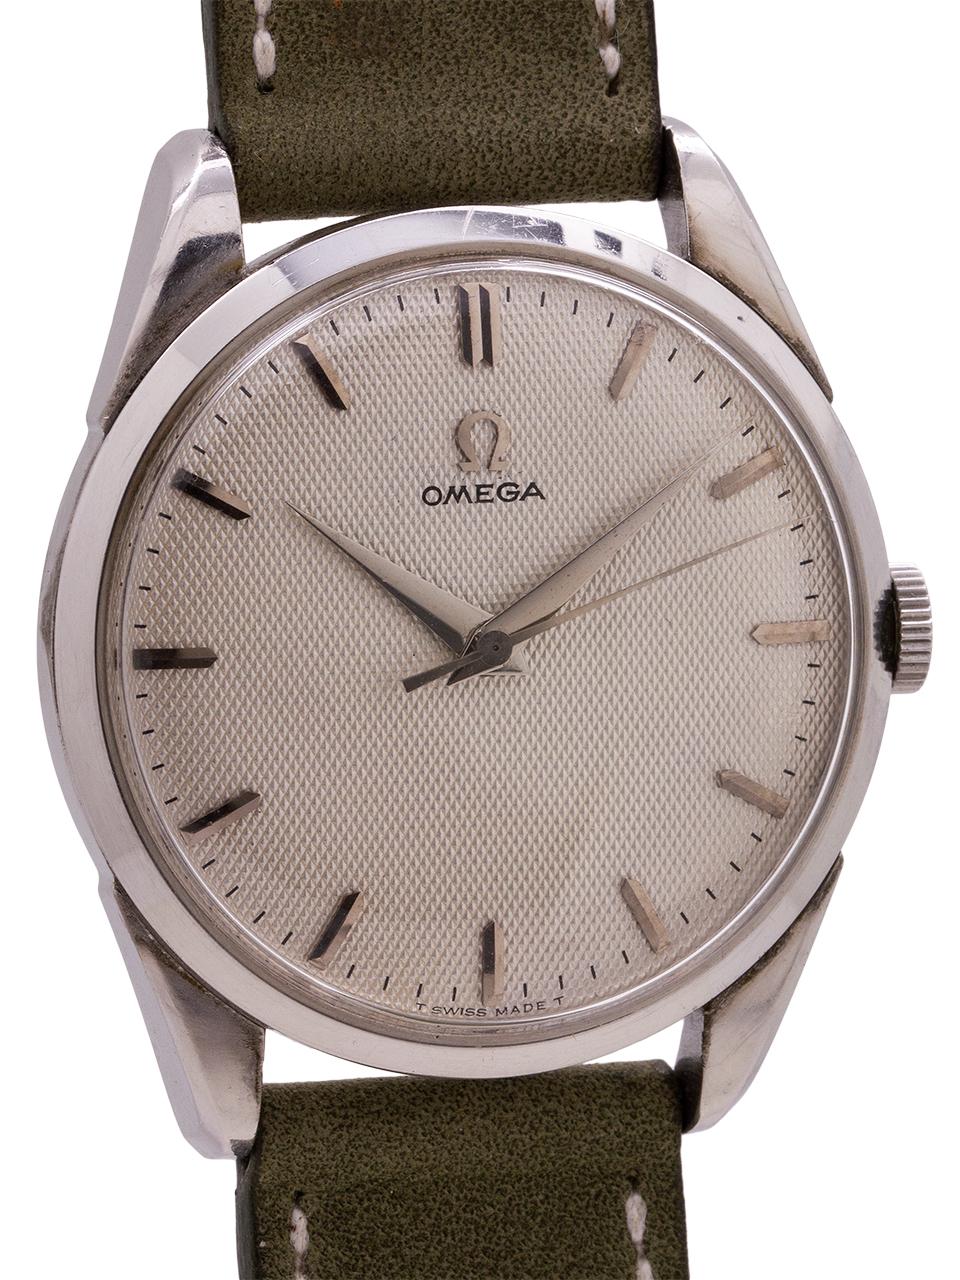 
Very clean design man’s vintage Omega manual wind ref# 25910-3SC, circa 1956. Featuring a large for the era 35mm diameter heavy stainless steel case with snap down case back. With a very pleasing original waffle texture silver satin dial with